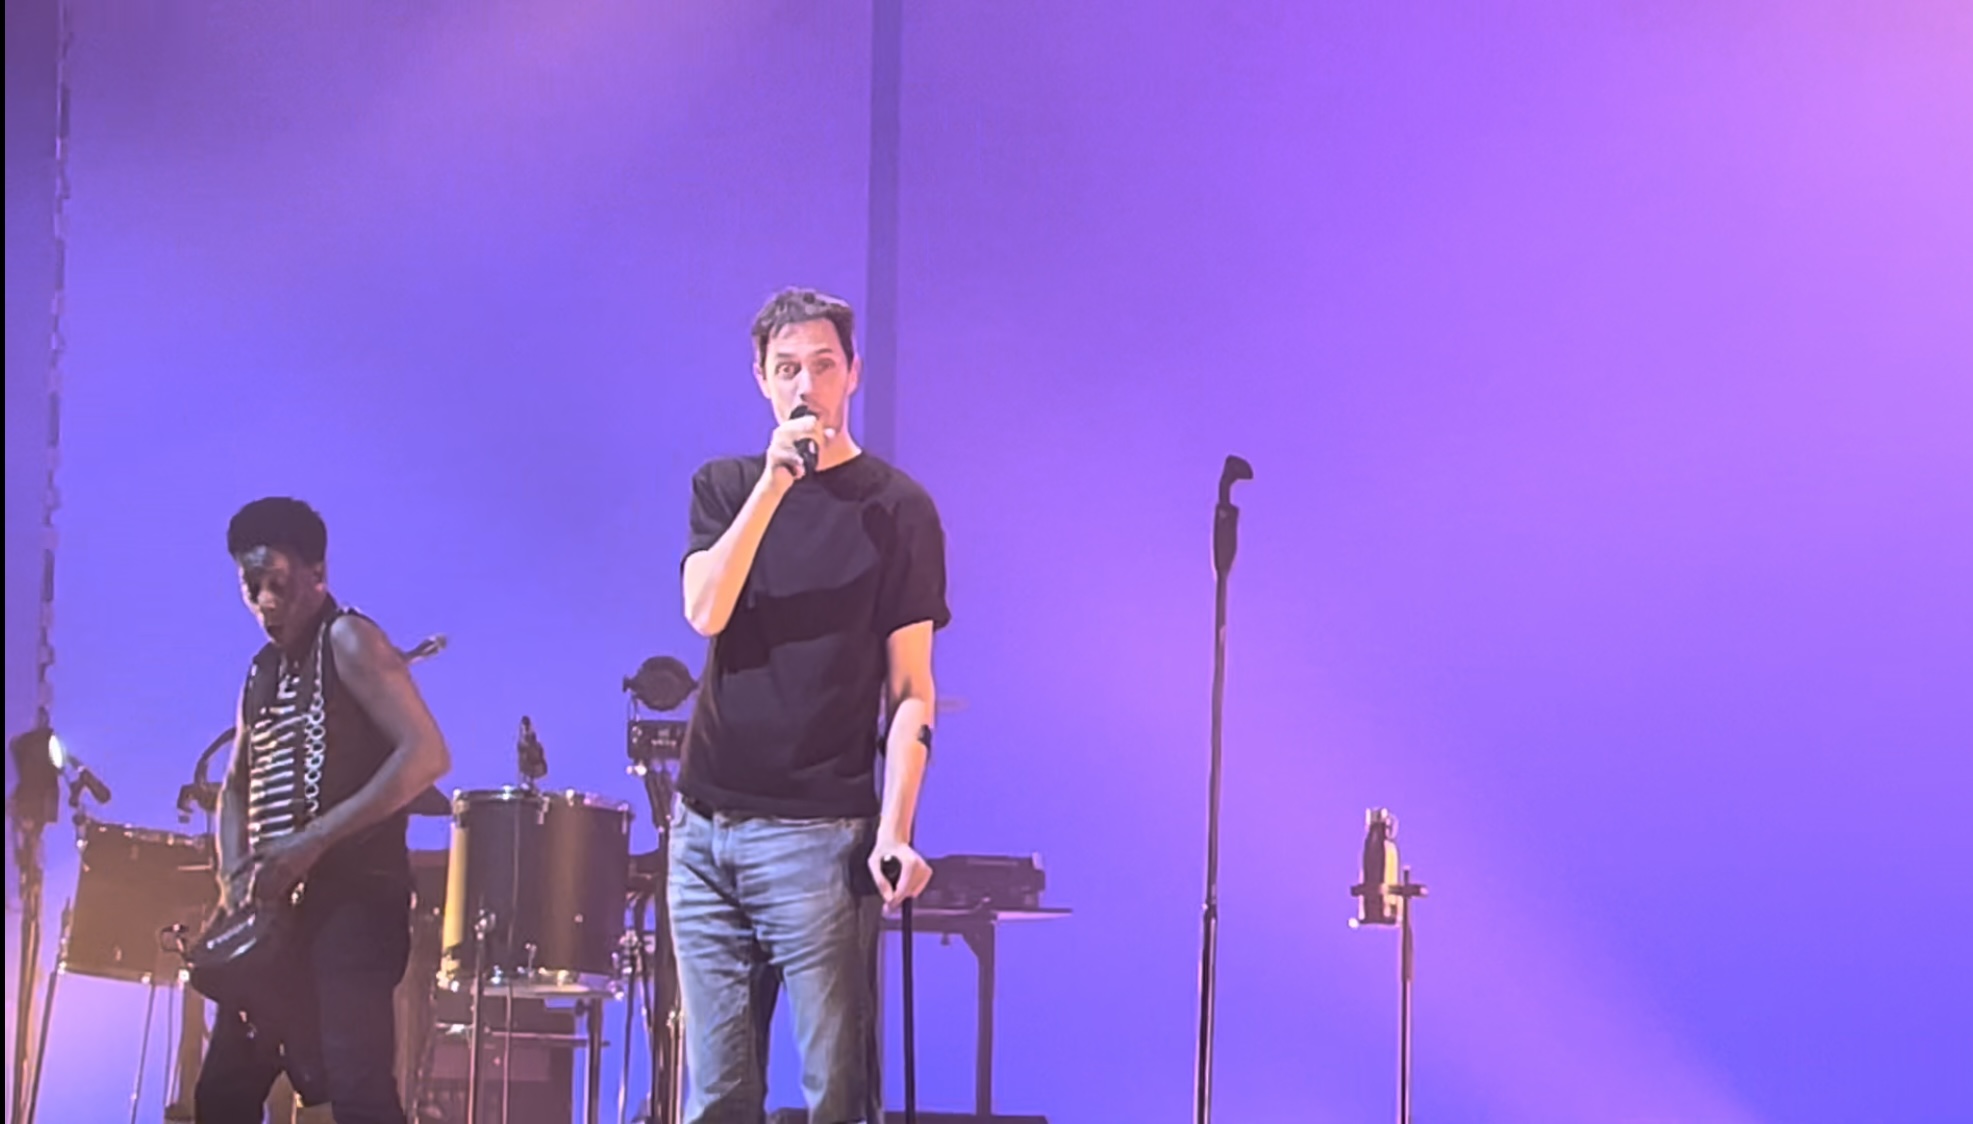 Grand corps malade - tournée - concert - Troyes - le cube -